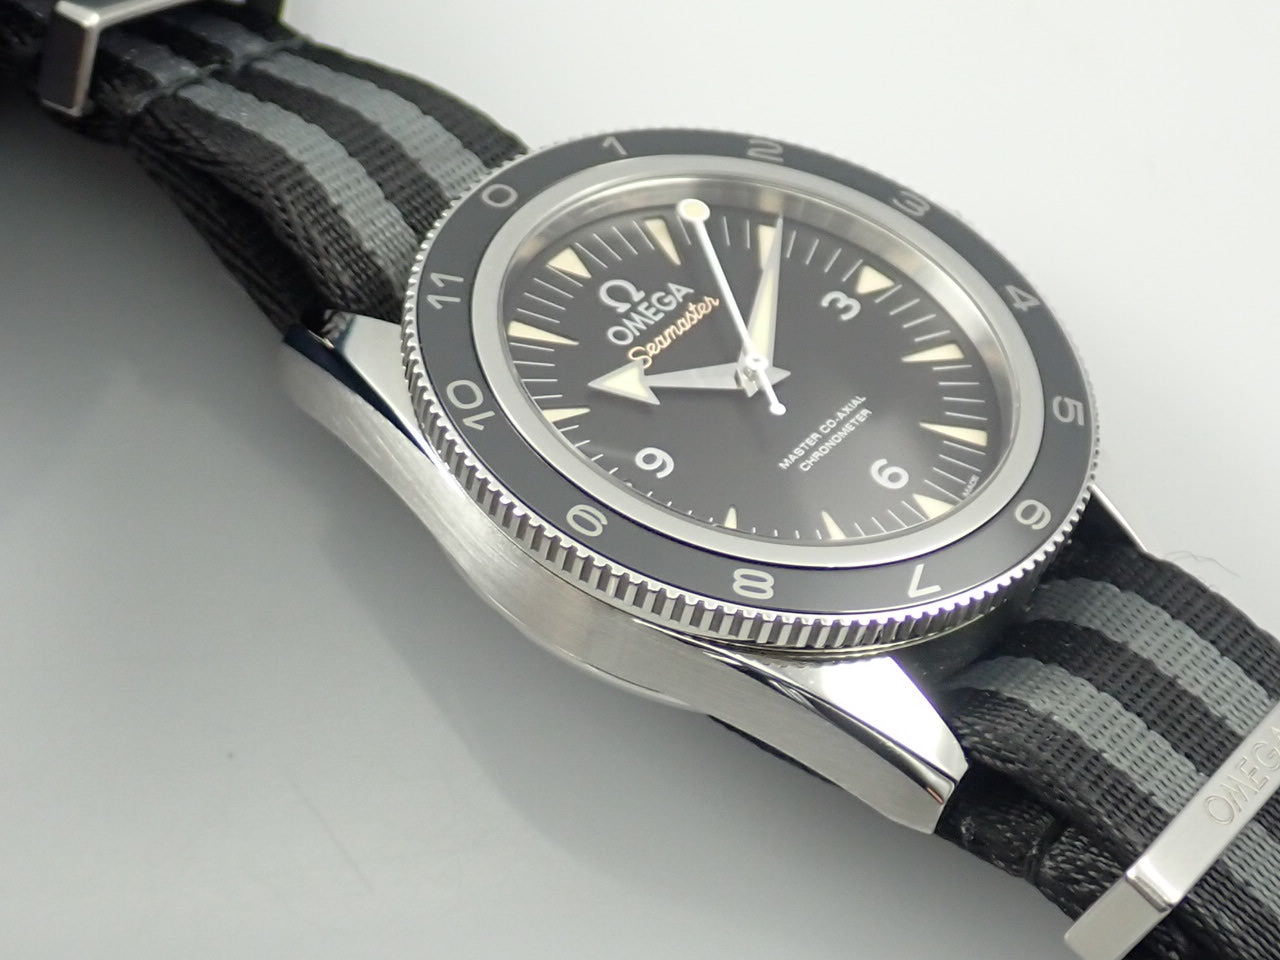 Omega Seamaster 300 Spectre Limited Edition &lt;Warranty Box and Others&gt;